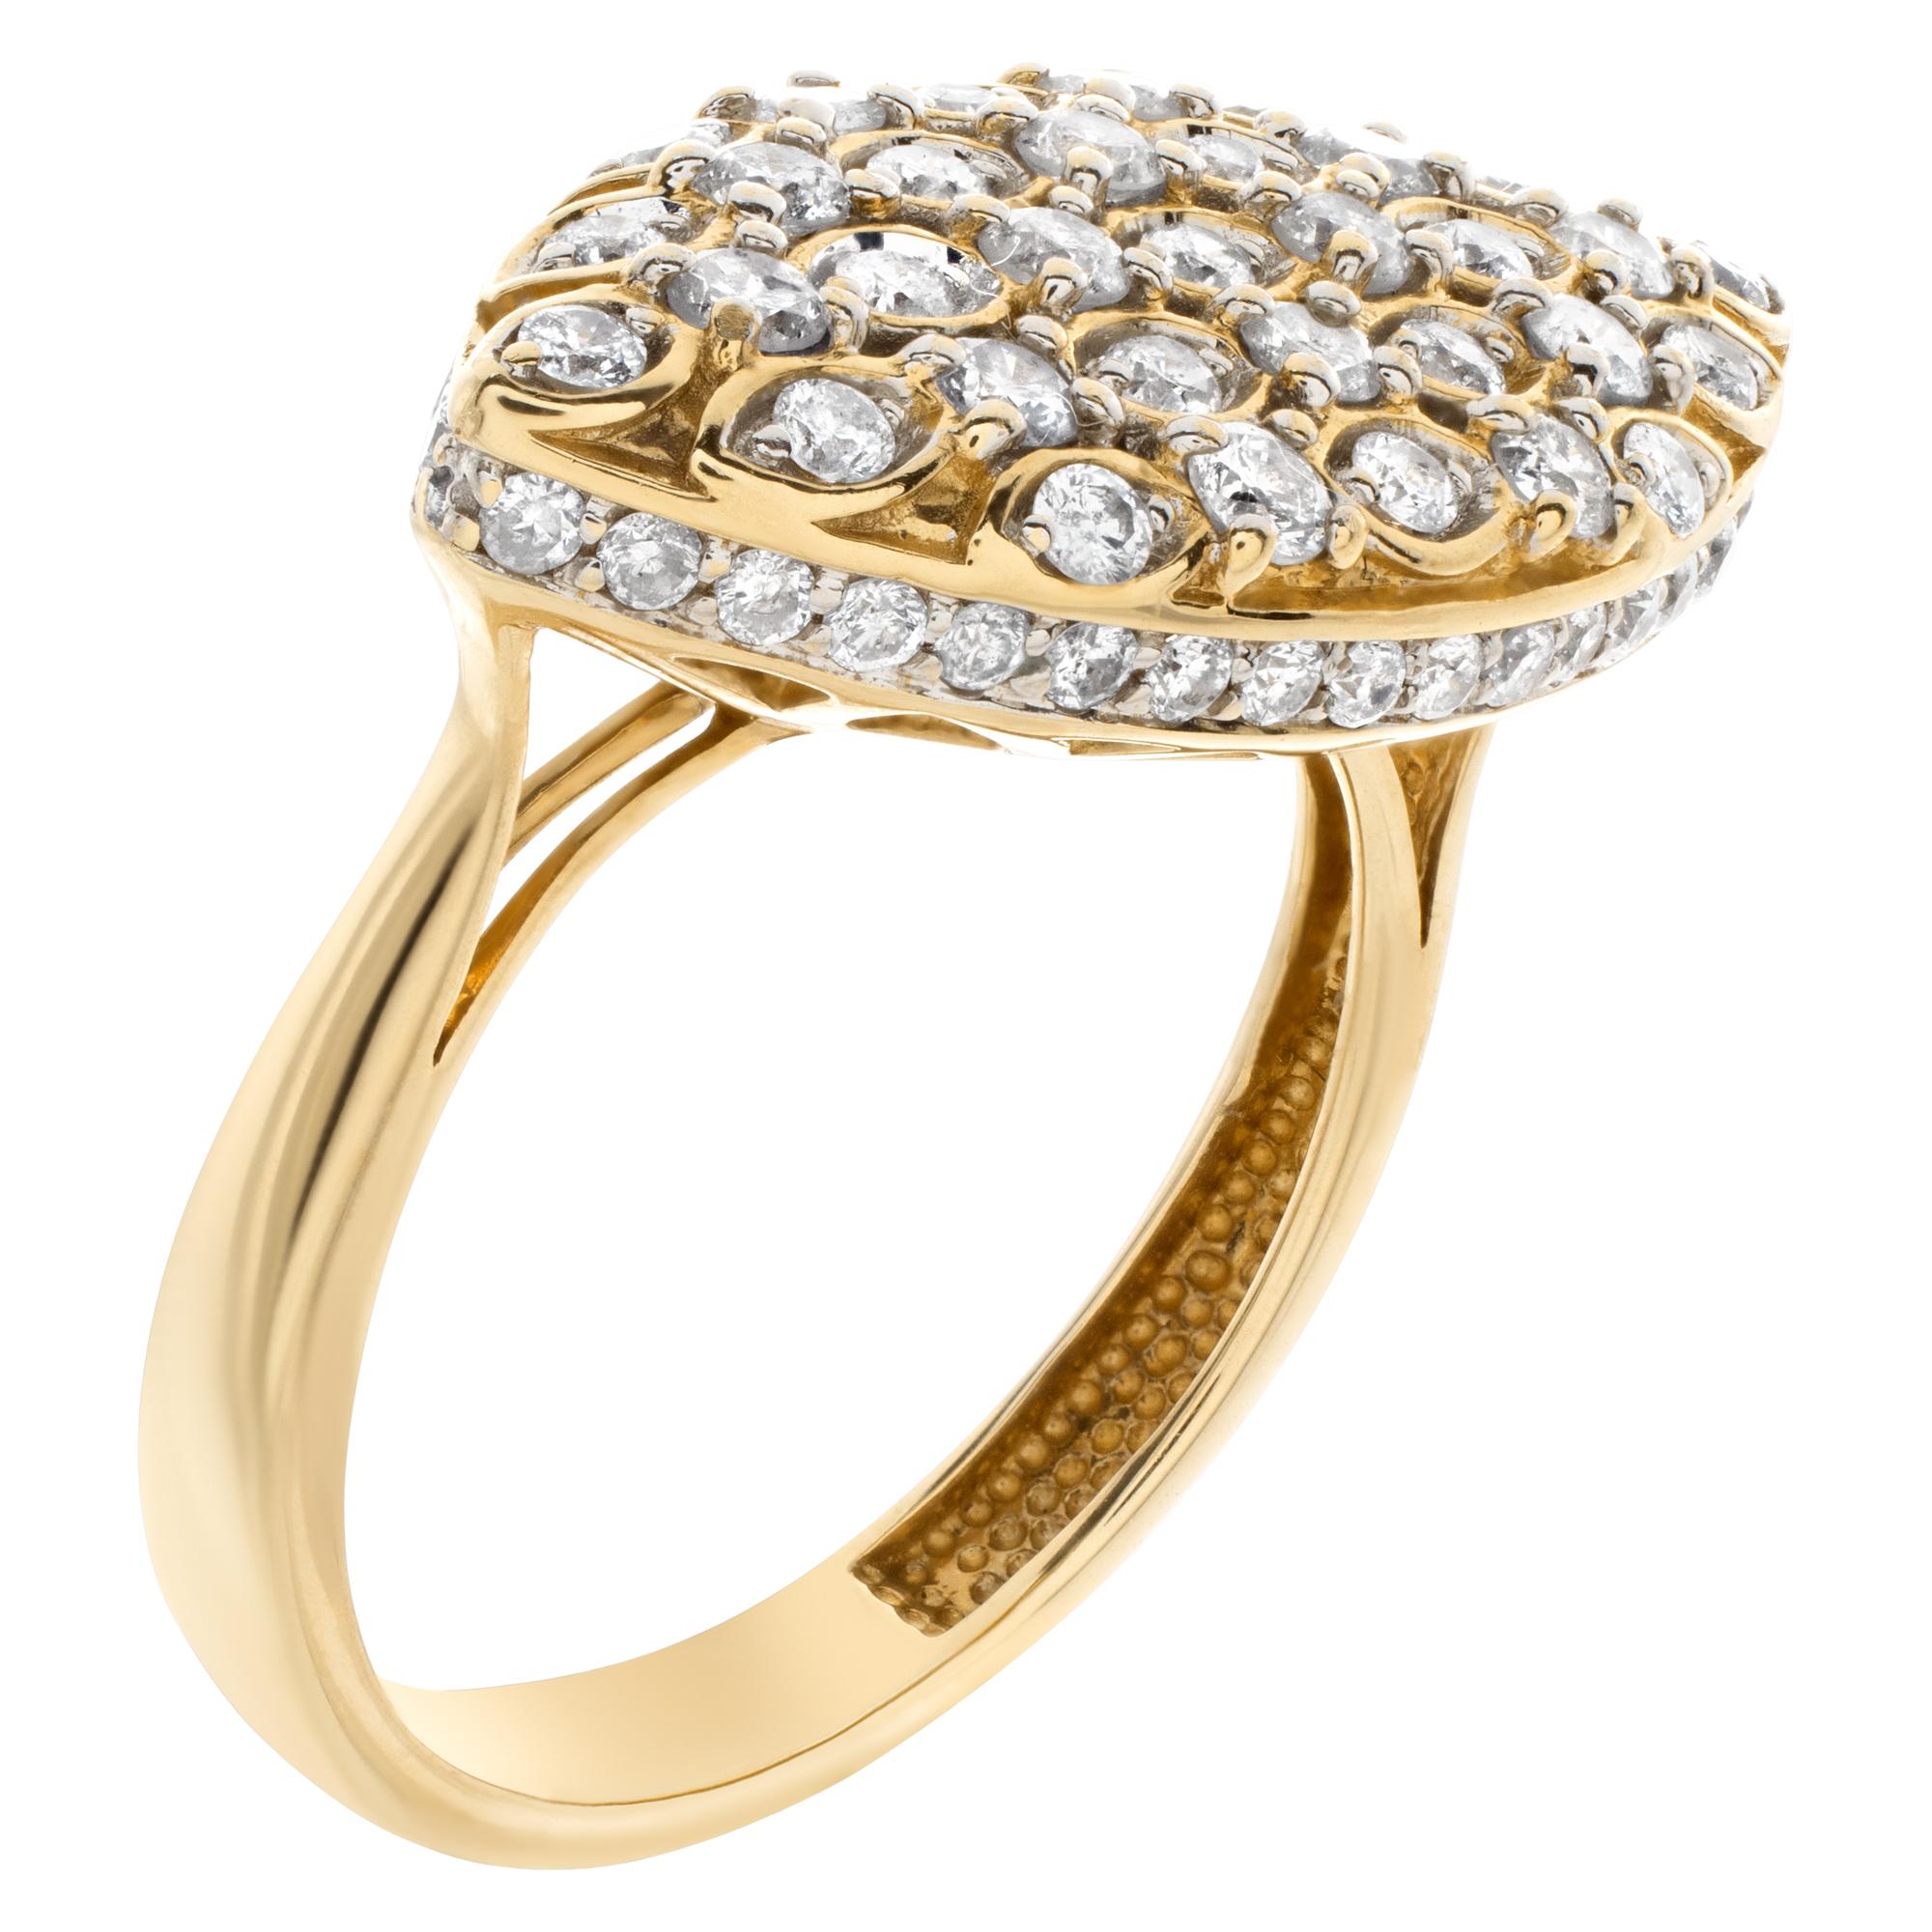 Women's Oval Diamond Ring in 14k Yellow Gold, 0.93 Carats in Pave Set Diamonds For Sale